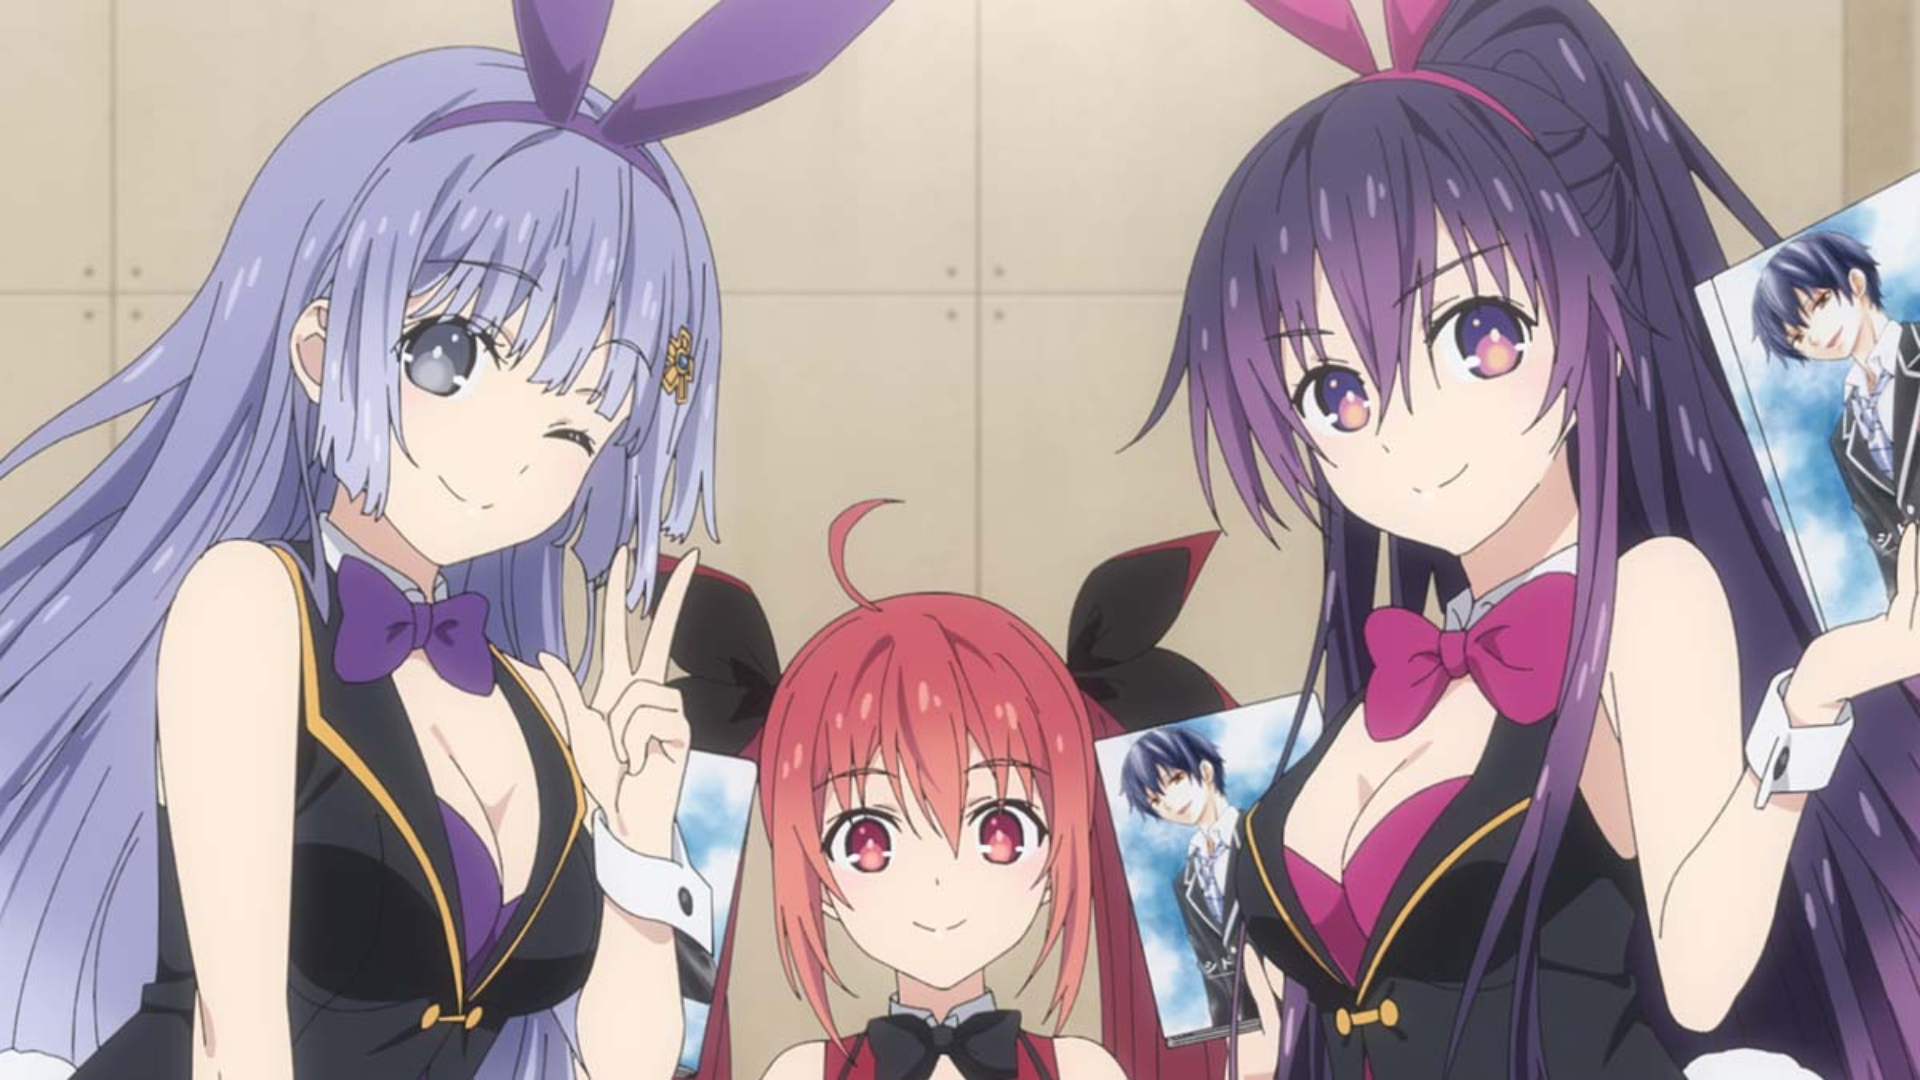 Anime Corner - 4 seasons of Date A Live, 4 different